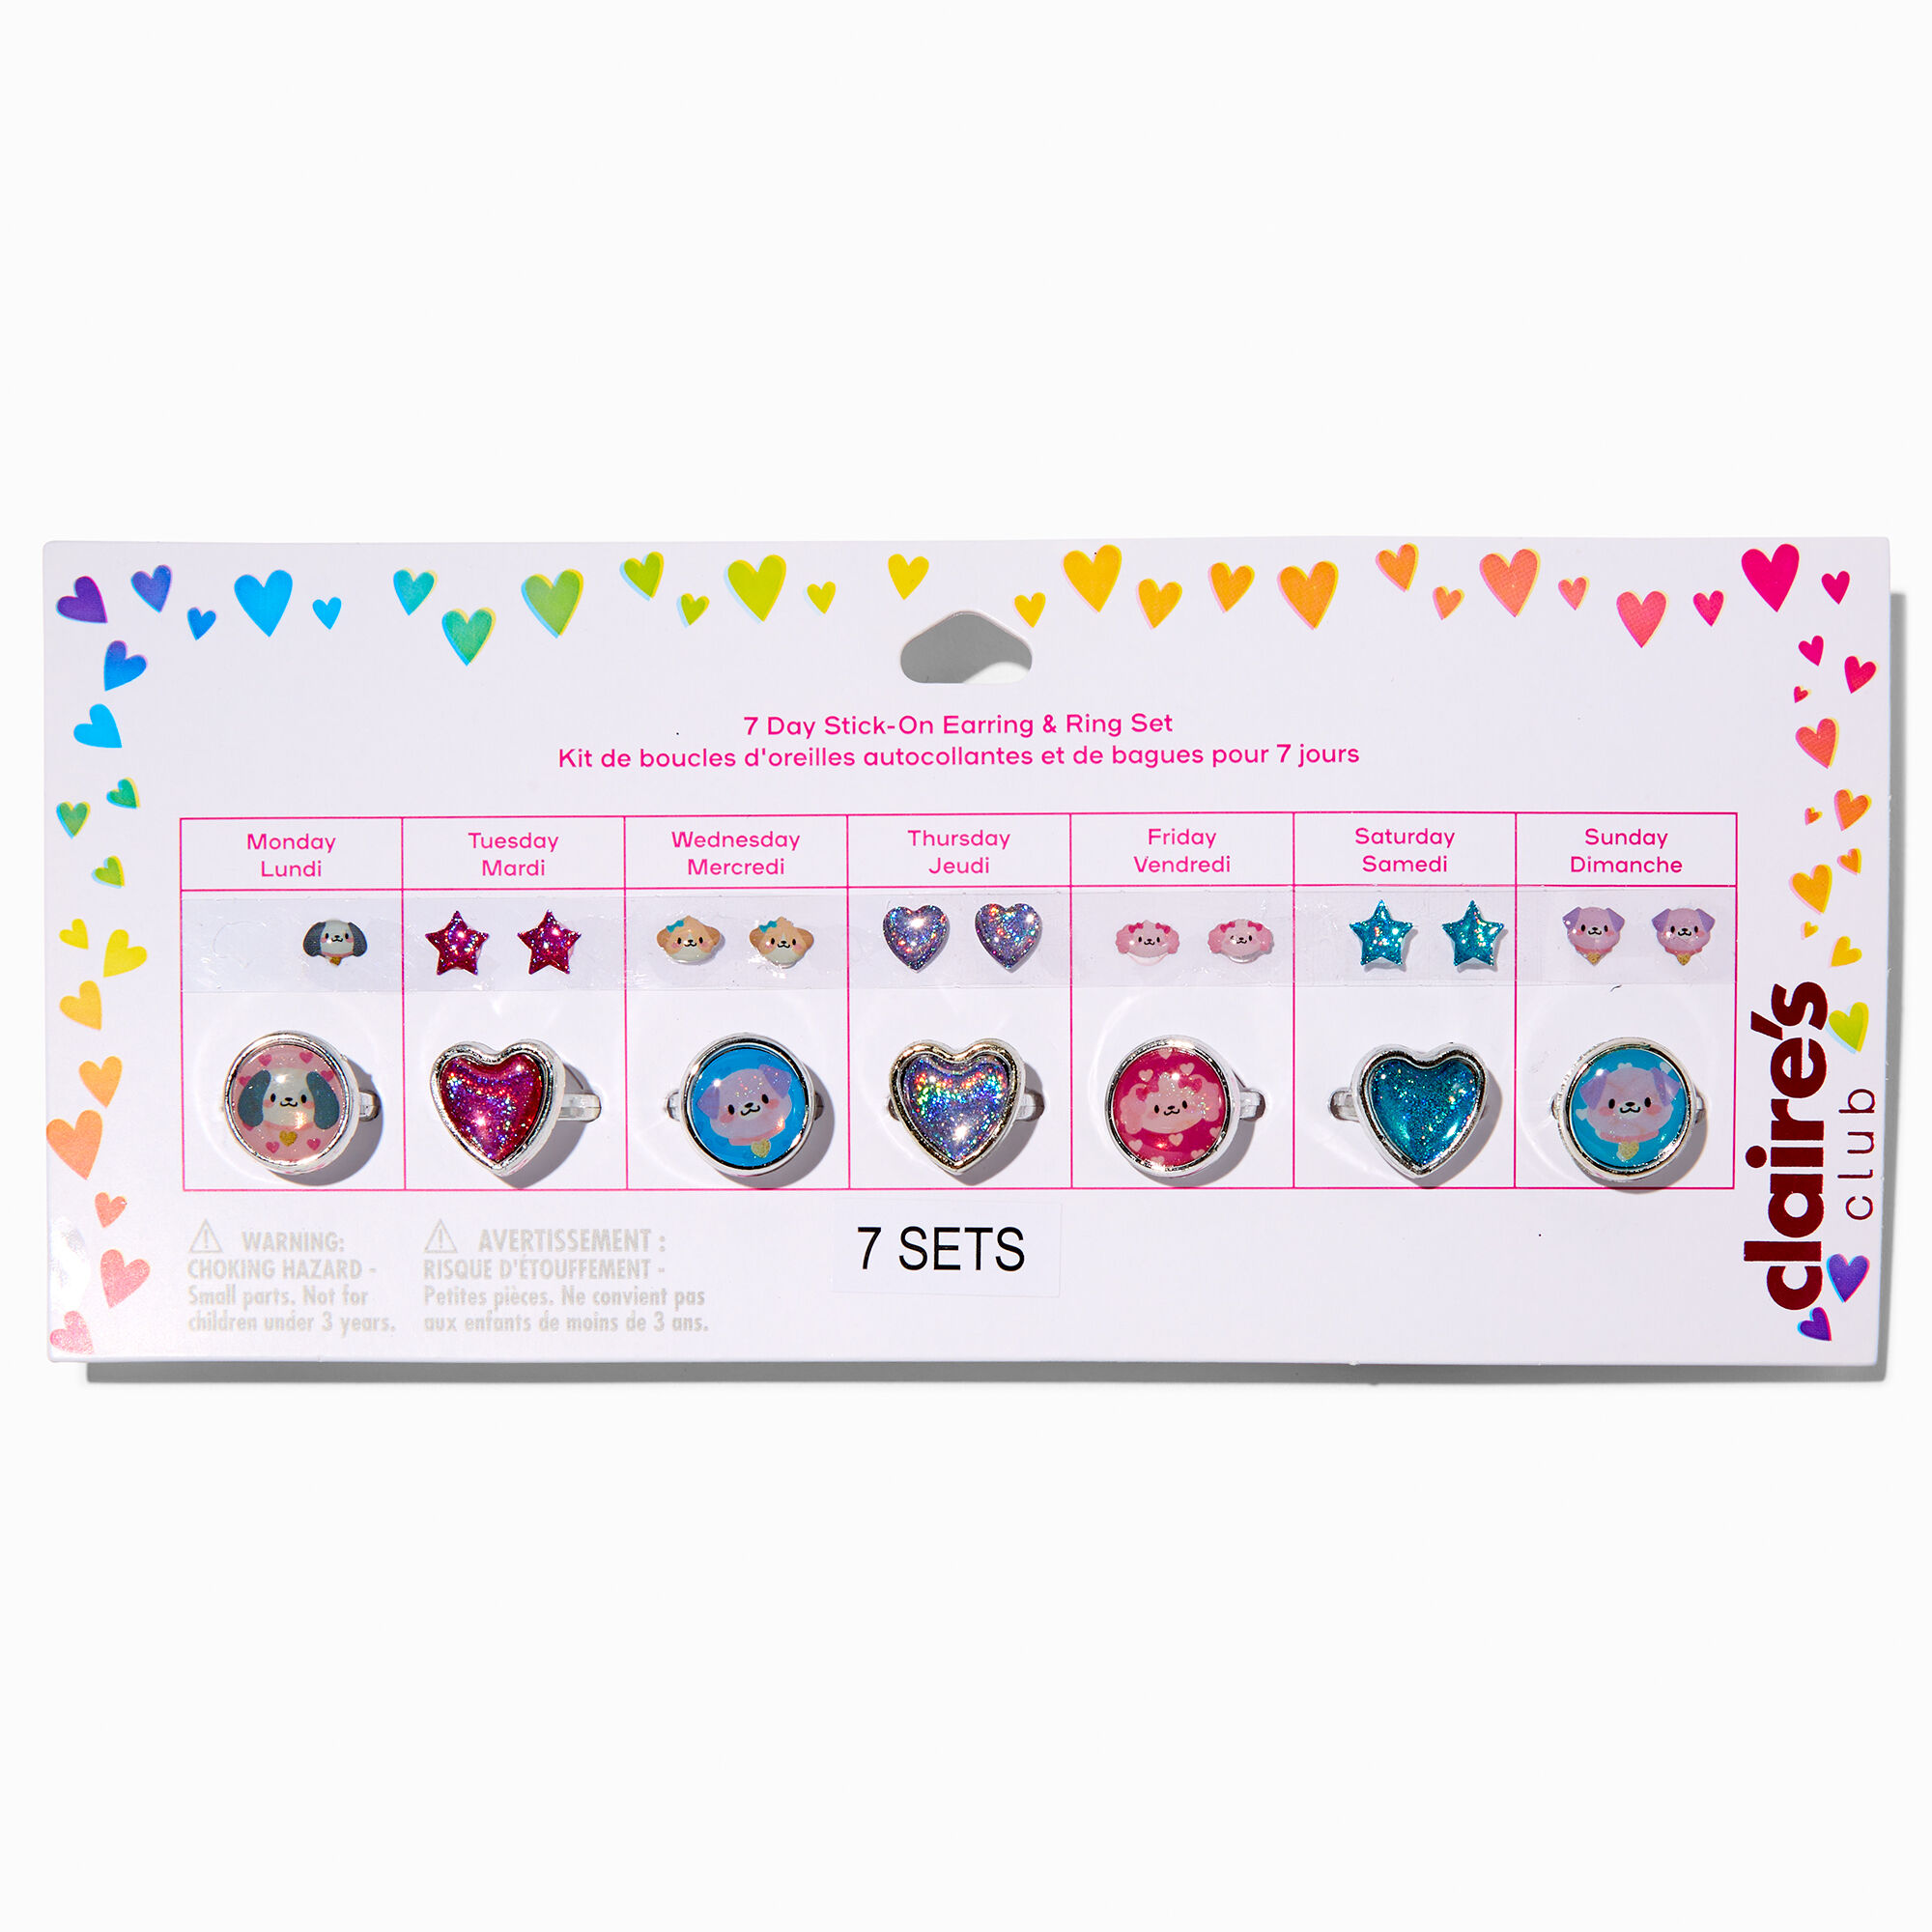 View Claires Club 7 Day Stick On Earrings Ring Set Pack information